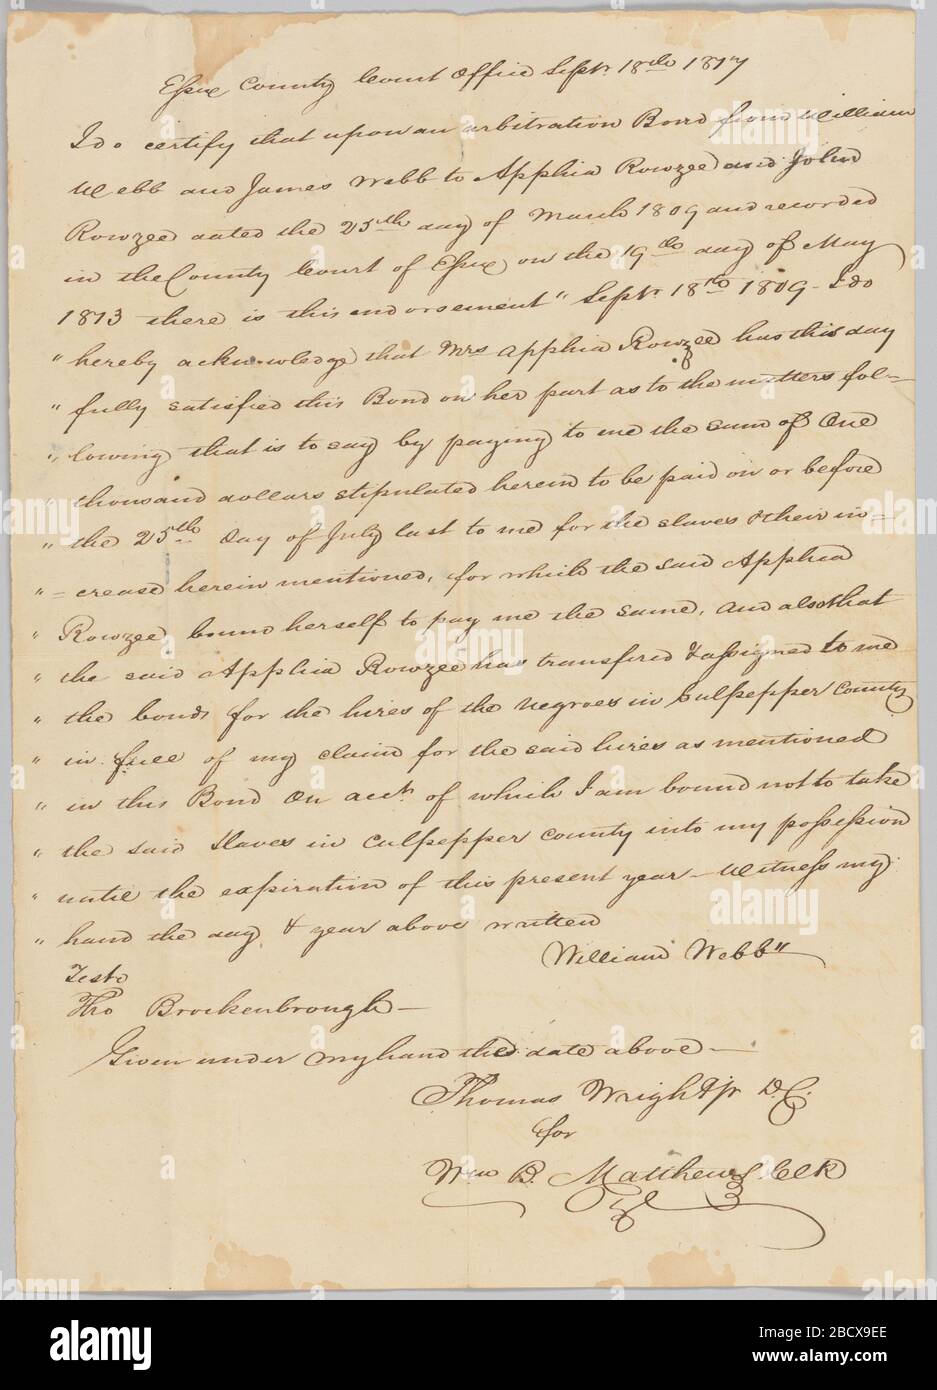 Transcript of court record regarding payment for the hire of enslaved persons. This document is from a collection of financial papers related to the plantation operations of several generations of the Rouzee Family in Essex County, Virginia. The papers date from the 1790s through 1860.Transcript of a court document from the Essex County court office. Transcript of court record regarding payment for the hire of enslaved persons Stock Photo